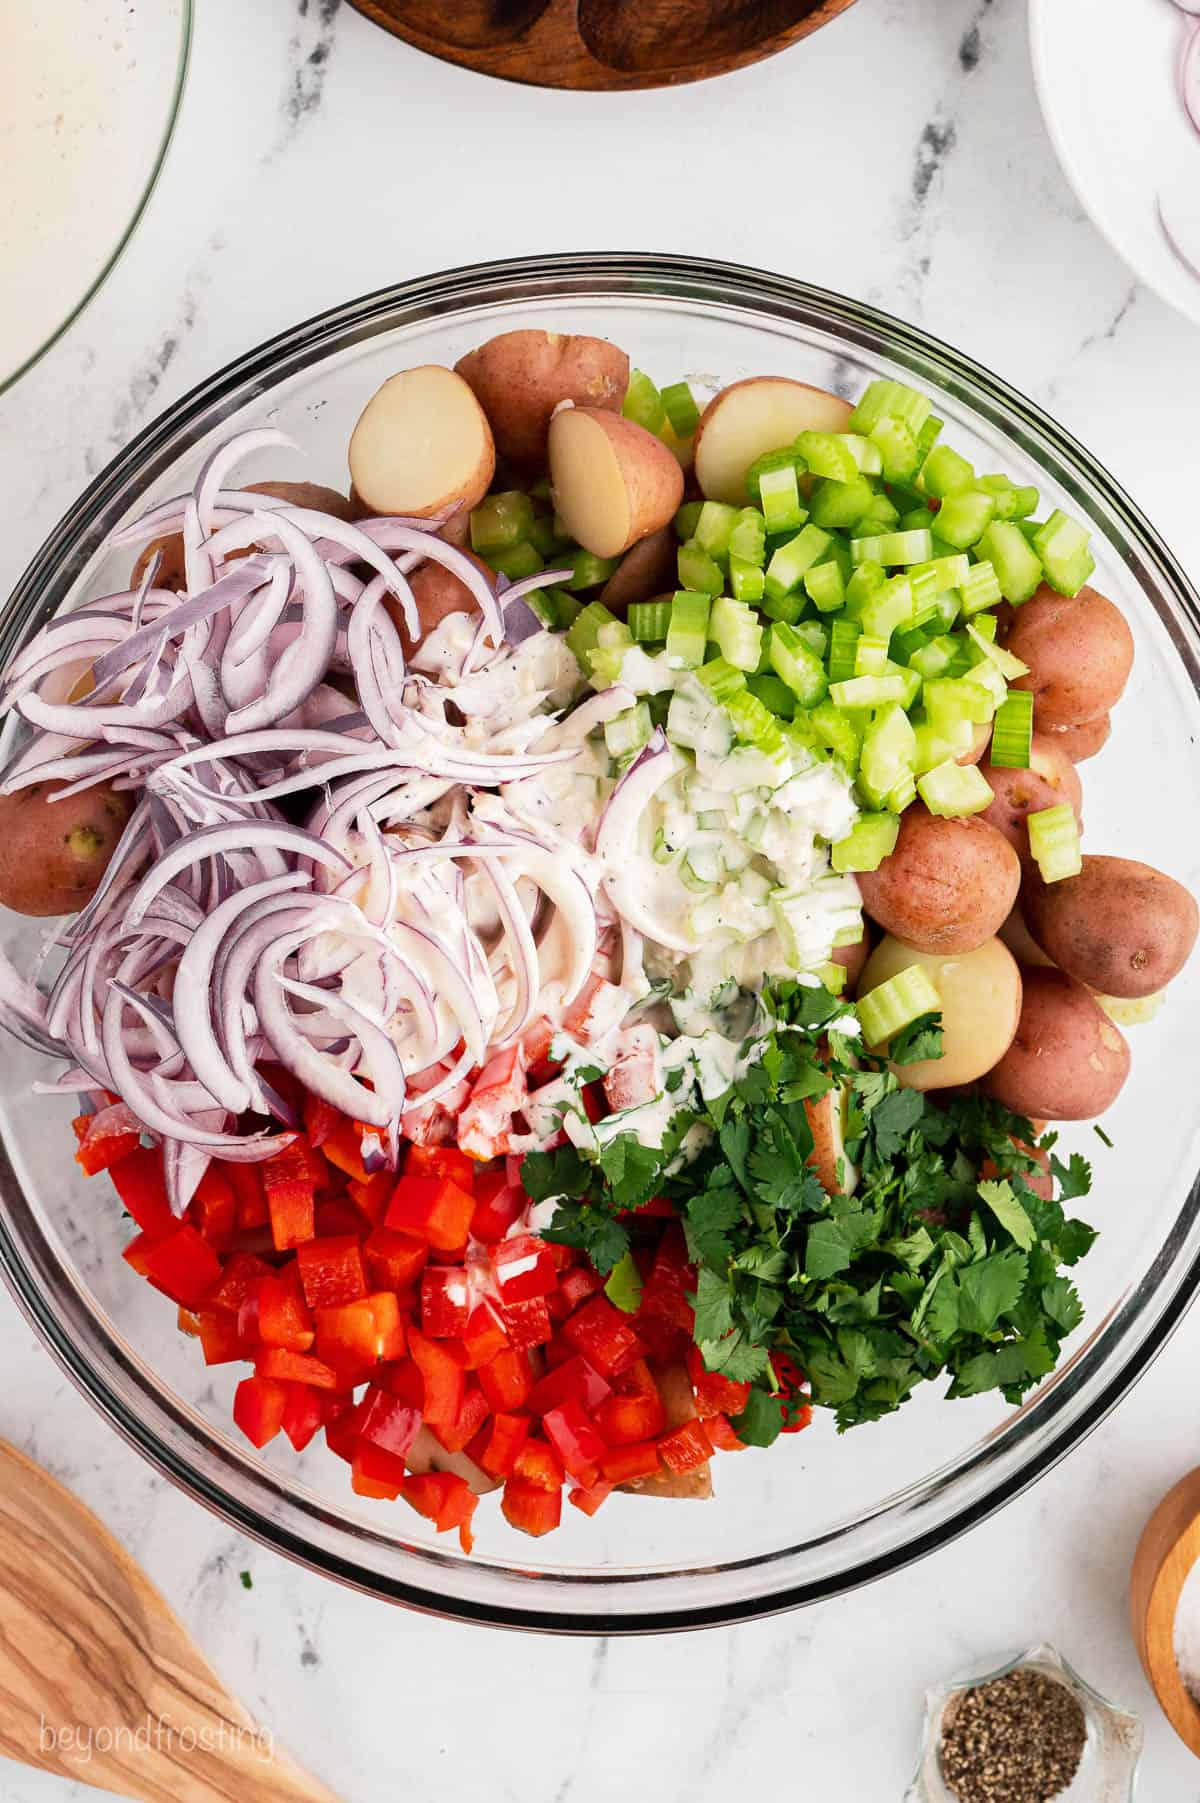 Red potato salad ingredients in a mixing bowl